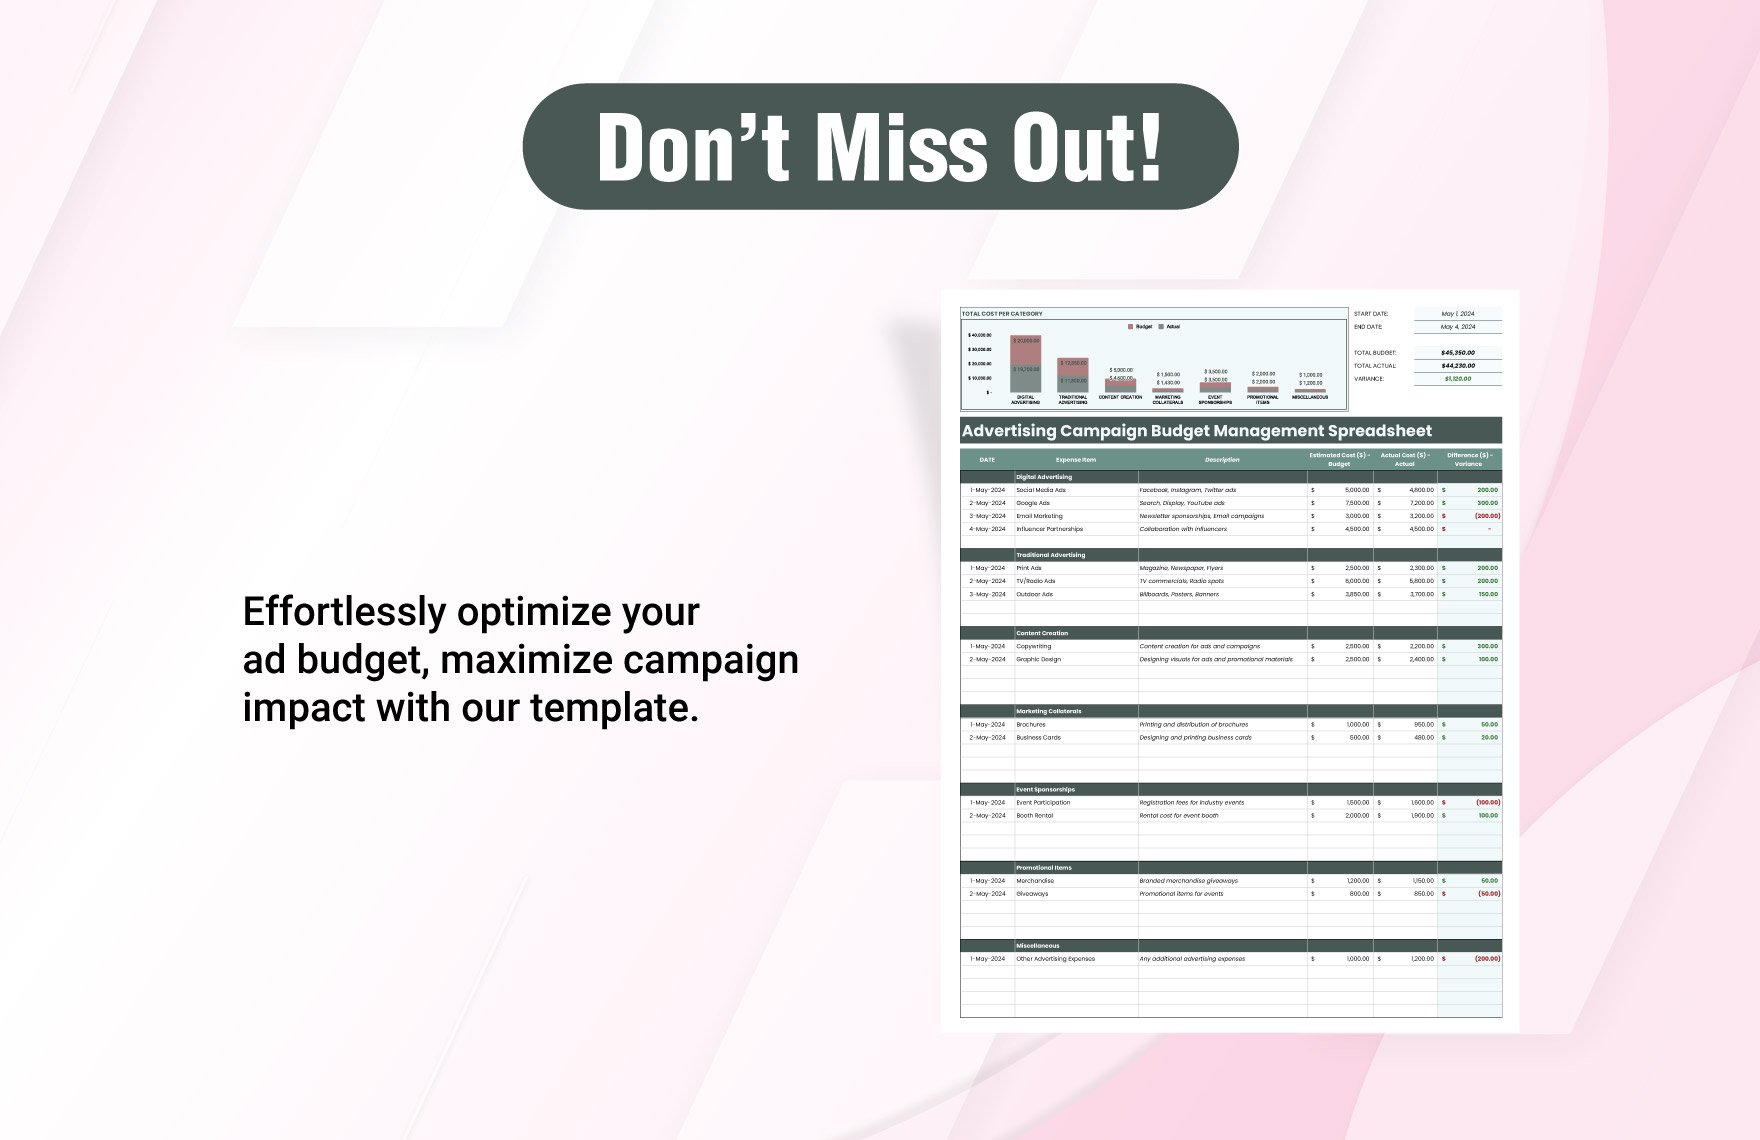 Advertising Campaign Budget Management Spreadsheet Template